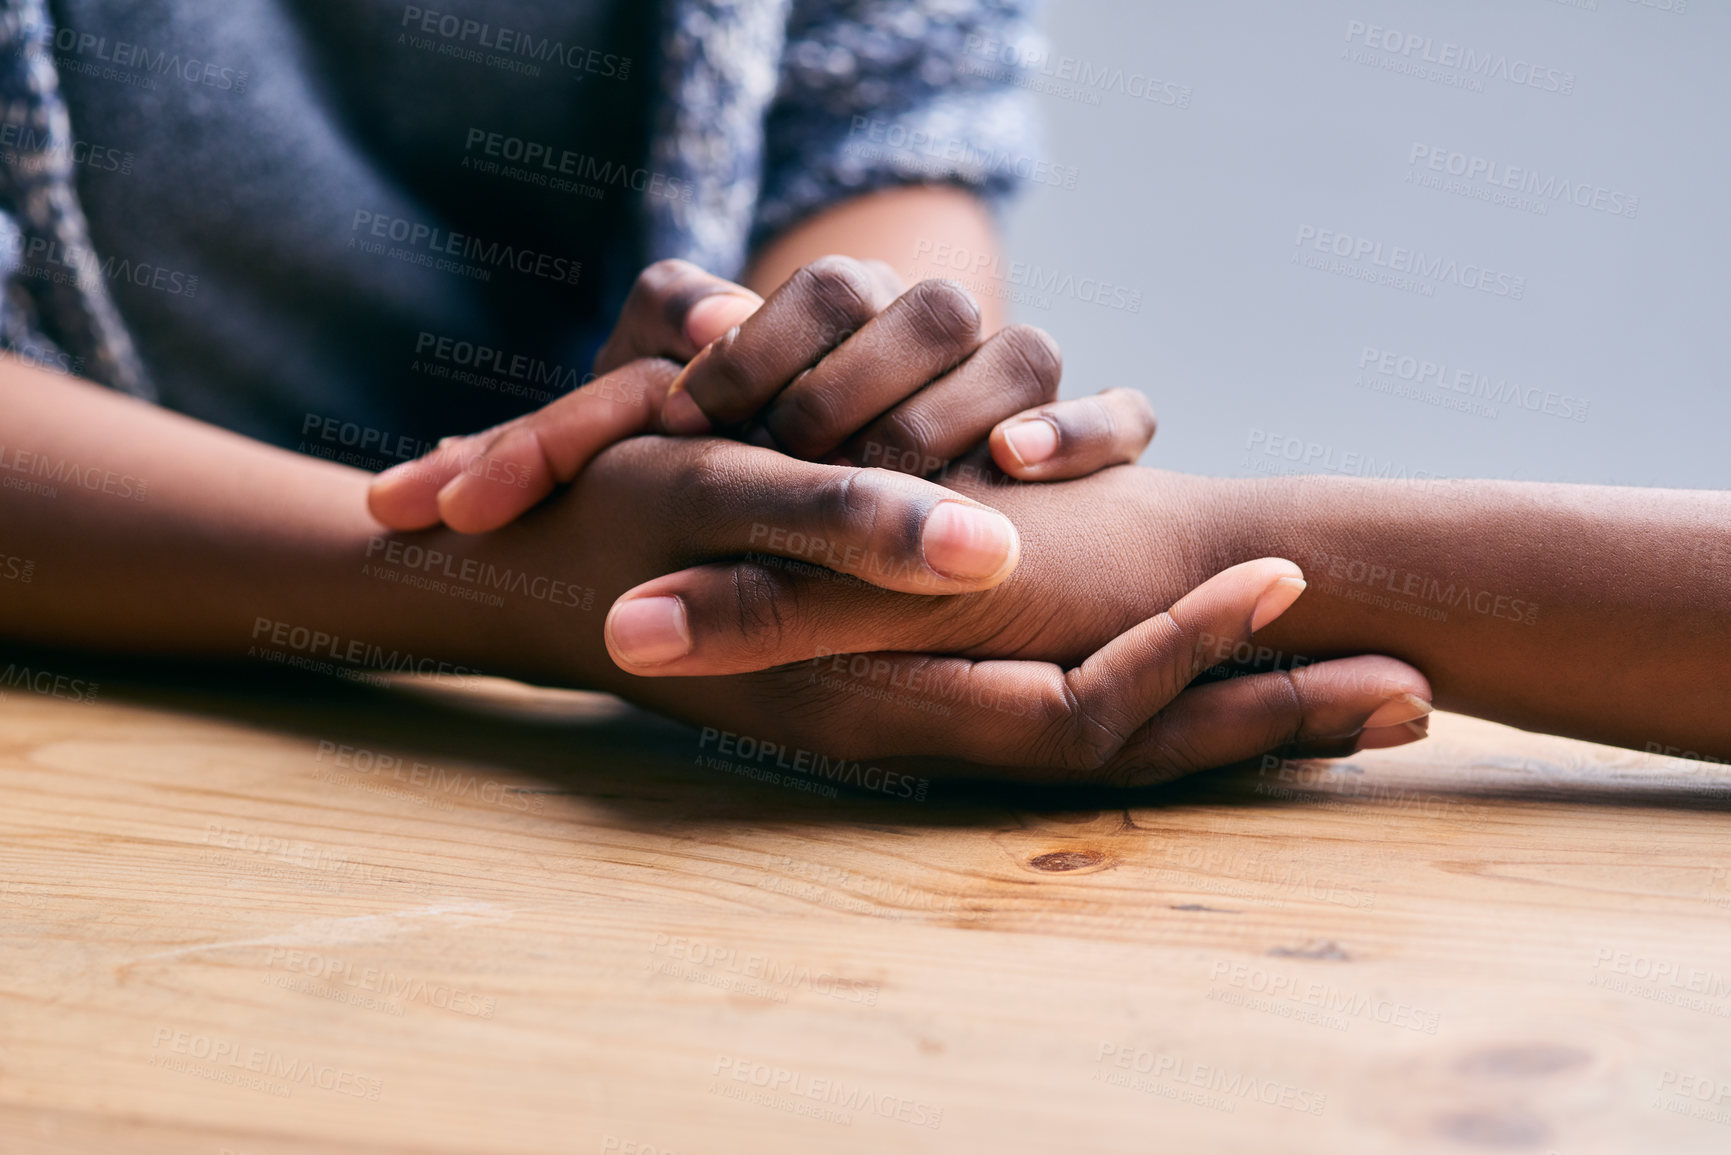 Buy stock photo Cropped shot of a two people holding hands in comfort on a table